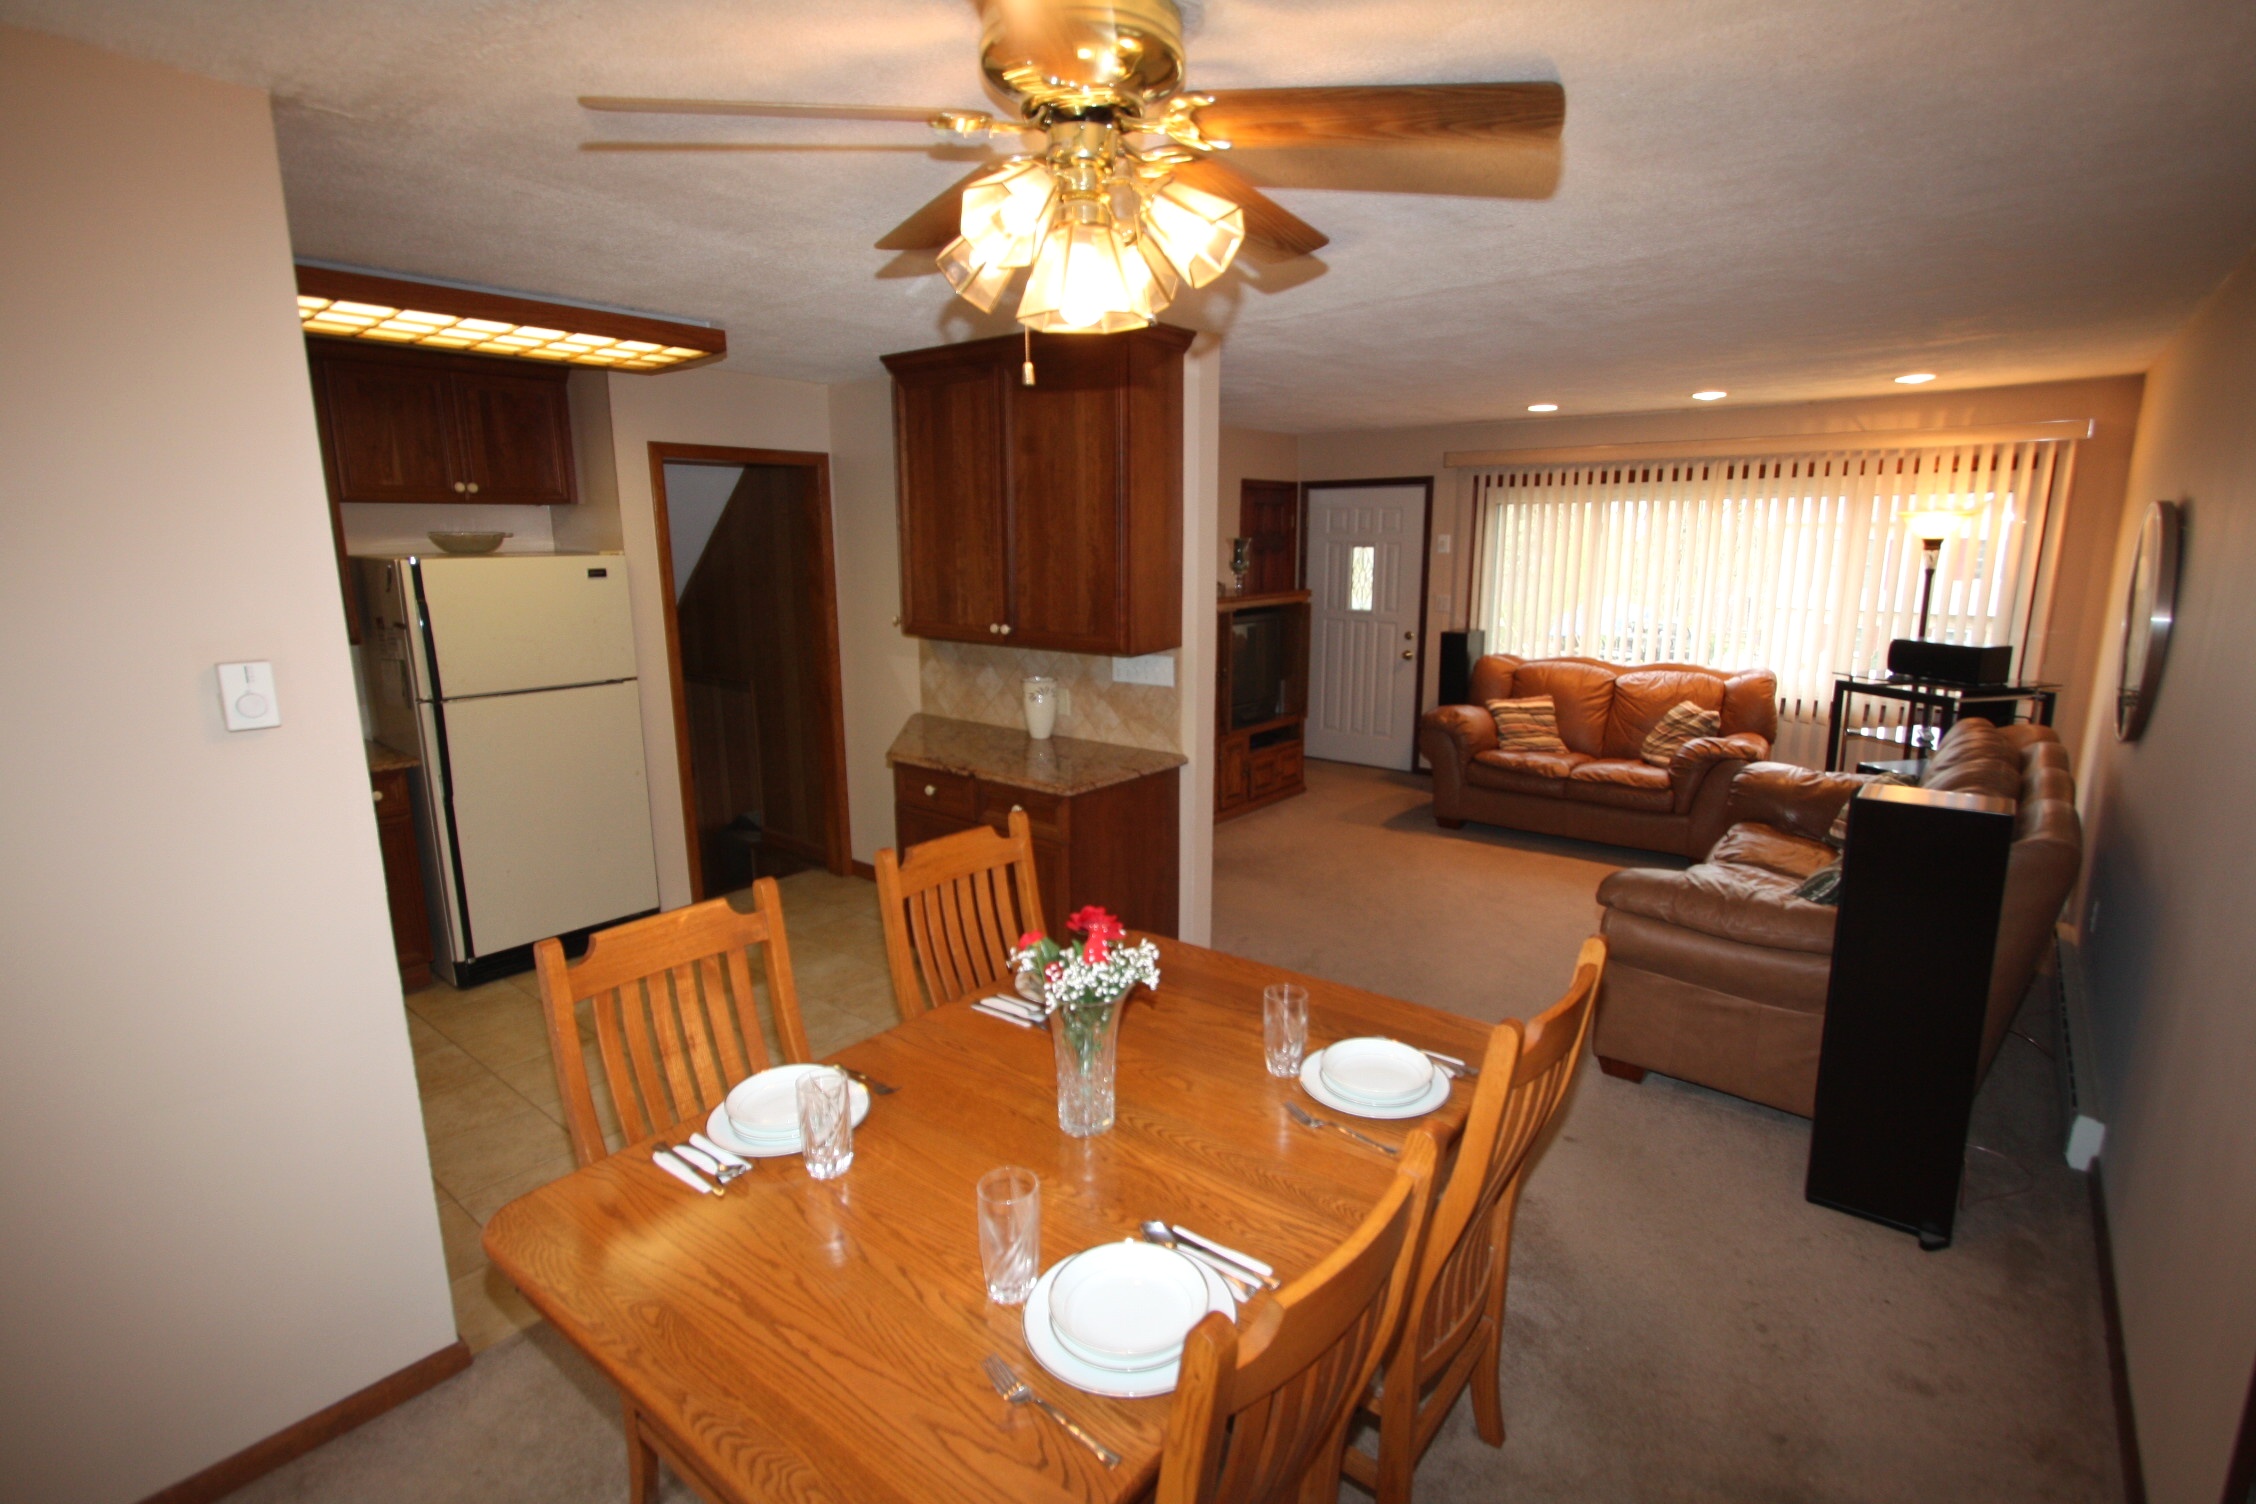 ceiling fan for dining room